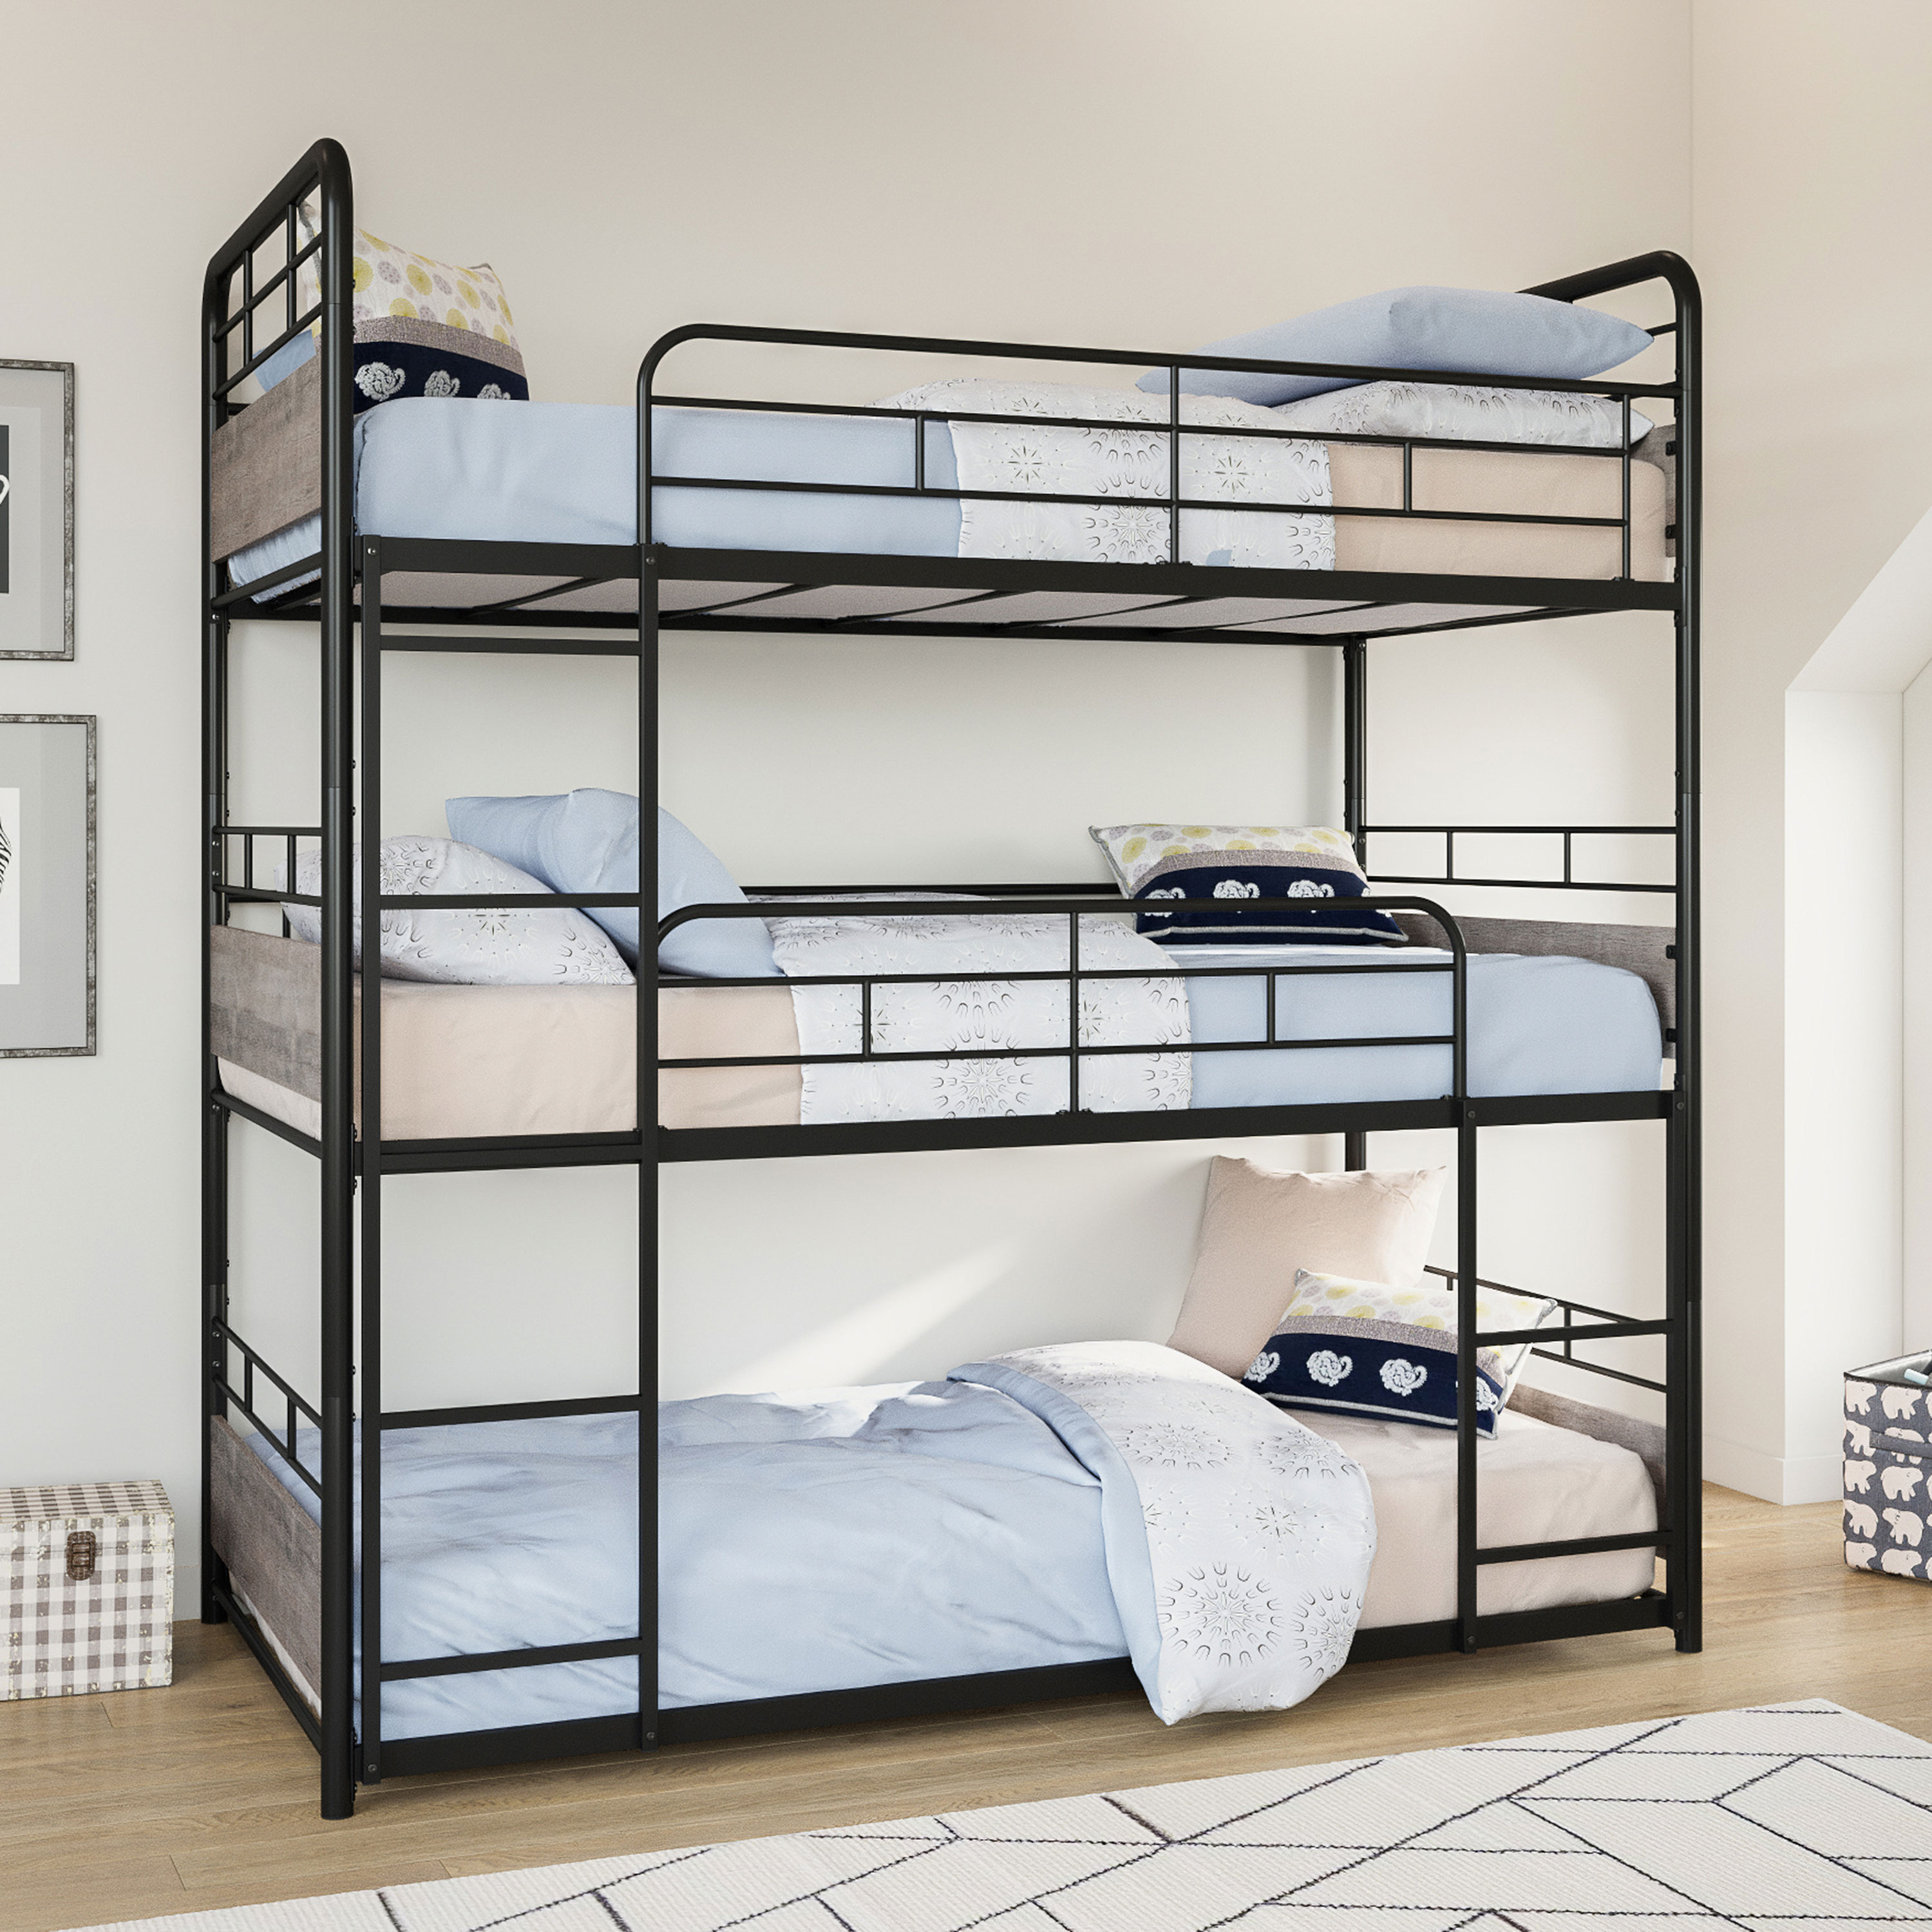 Better Homes & Gardens Anniston Convertible Black Metal Triple Twin Bunk Bed, Gray Wood Accents - image 14 of 26